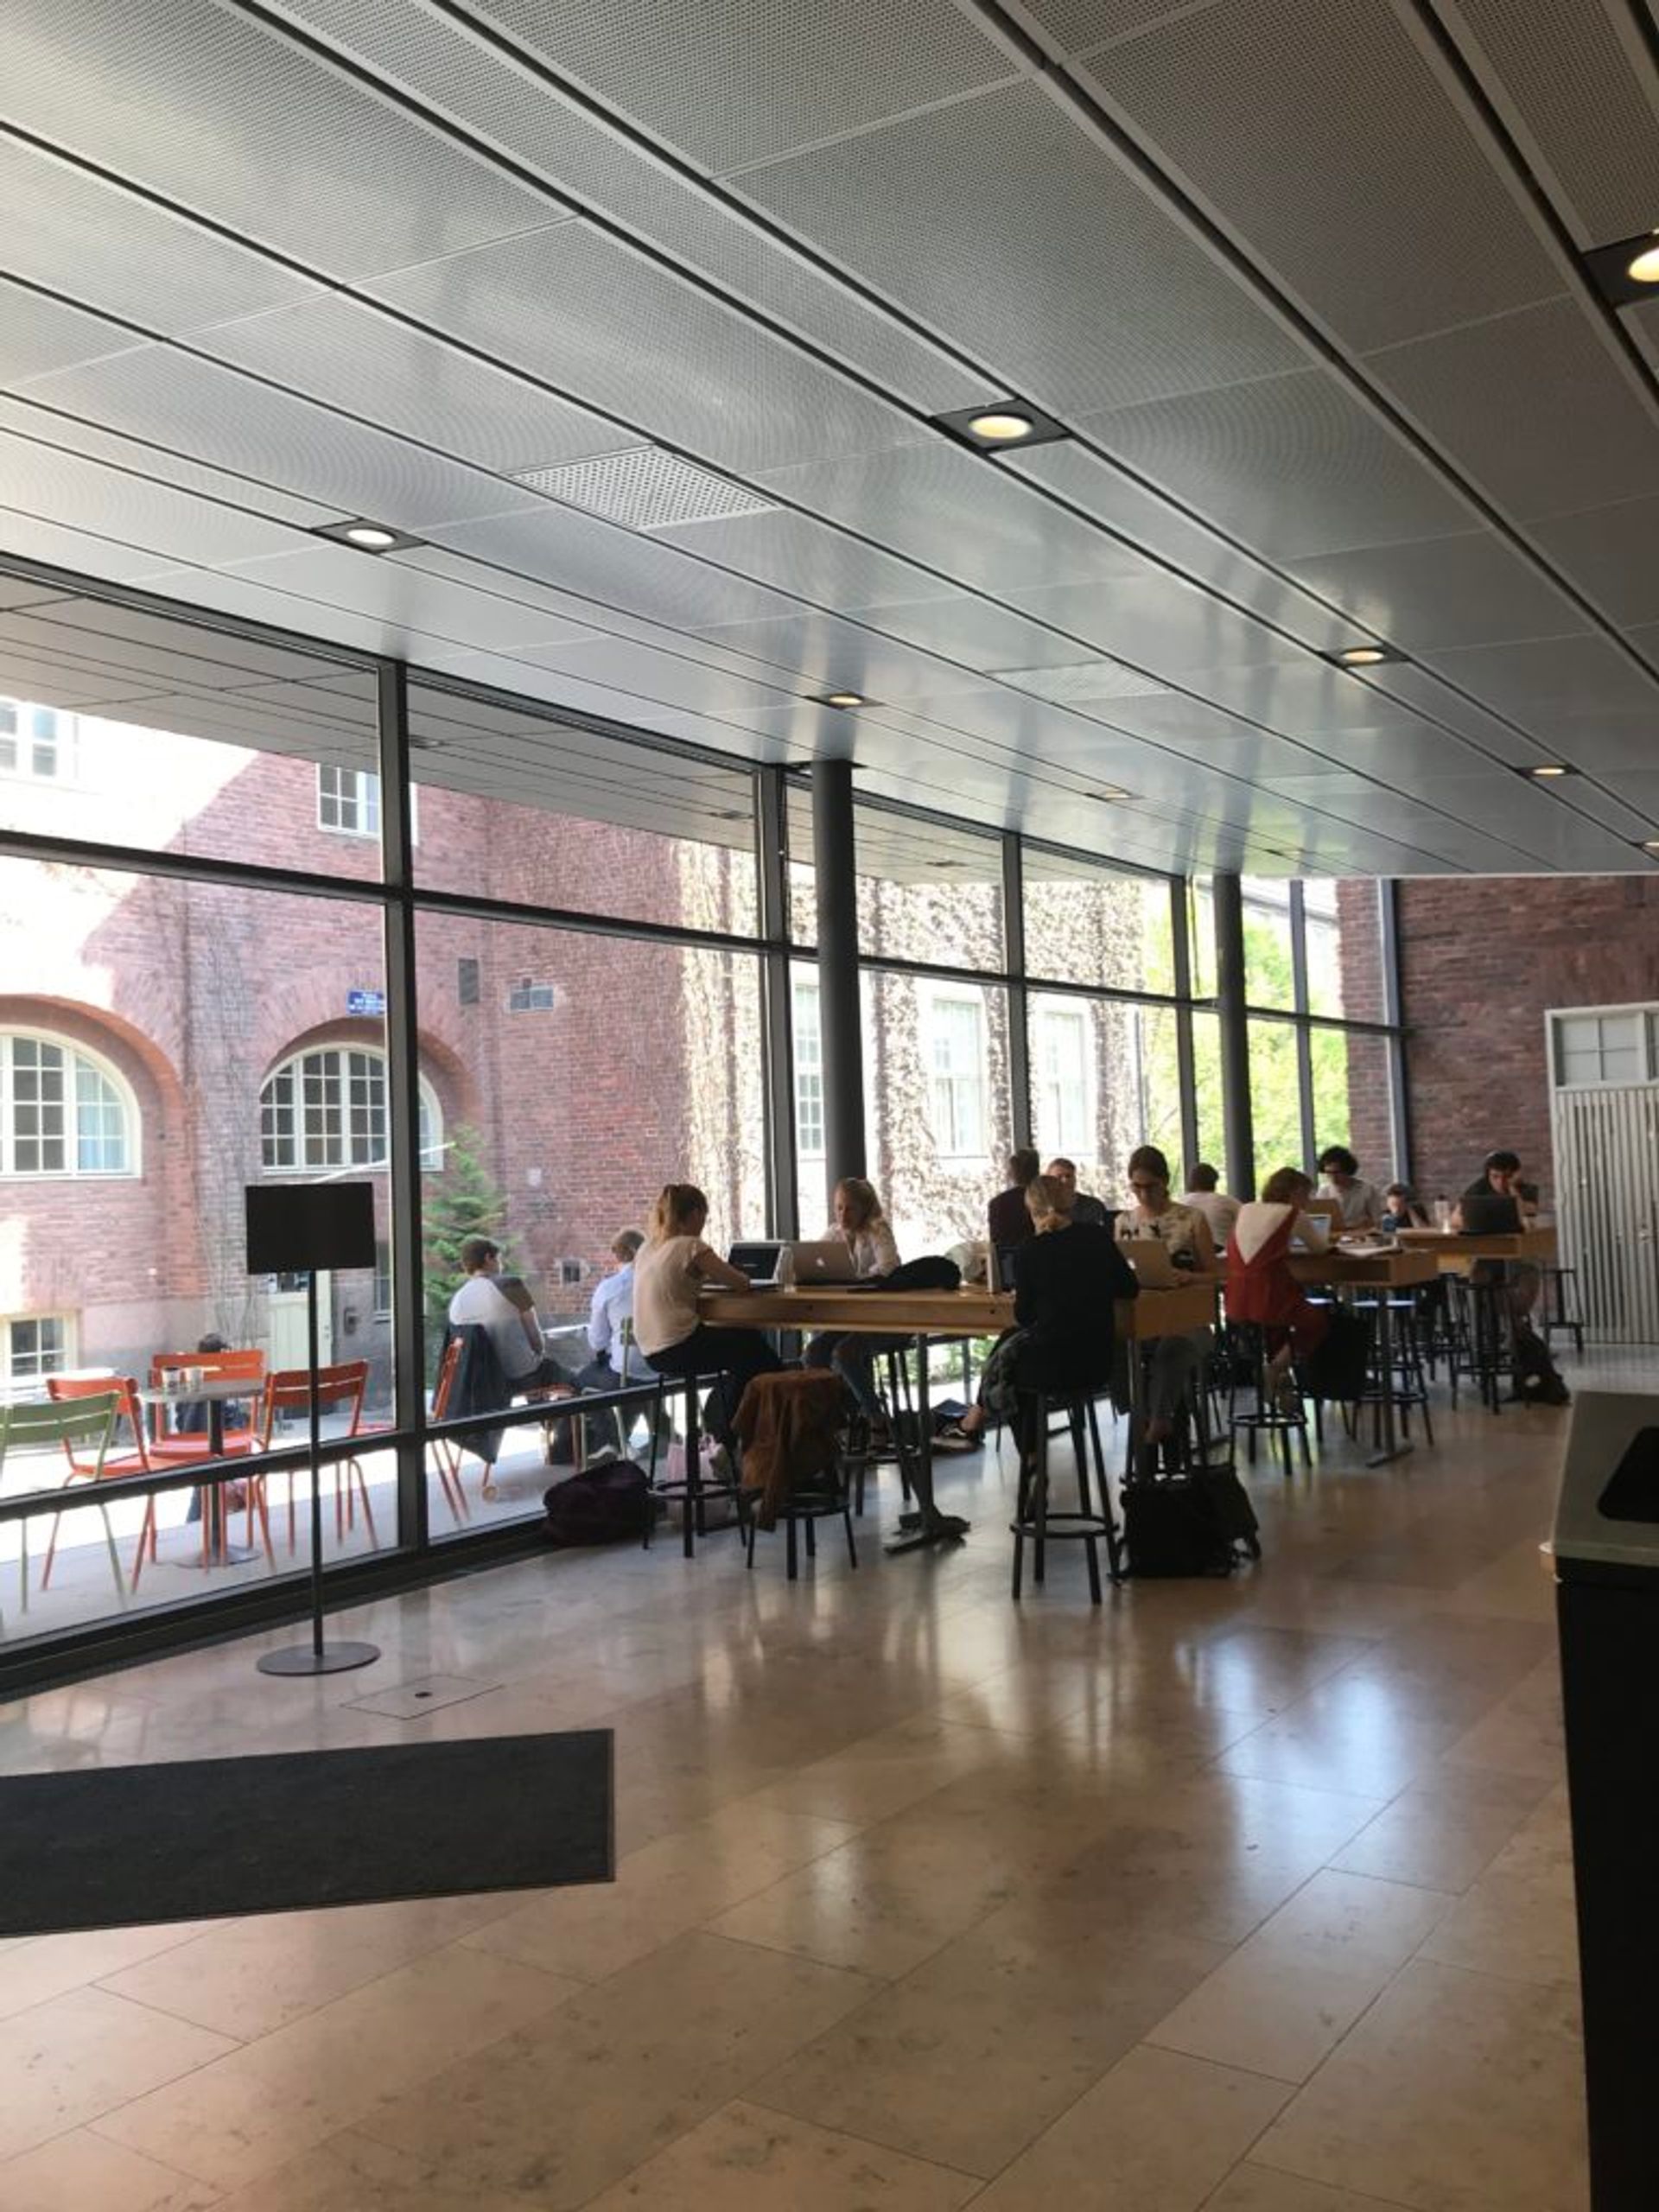 Students eating lunch and studying at tables inside.